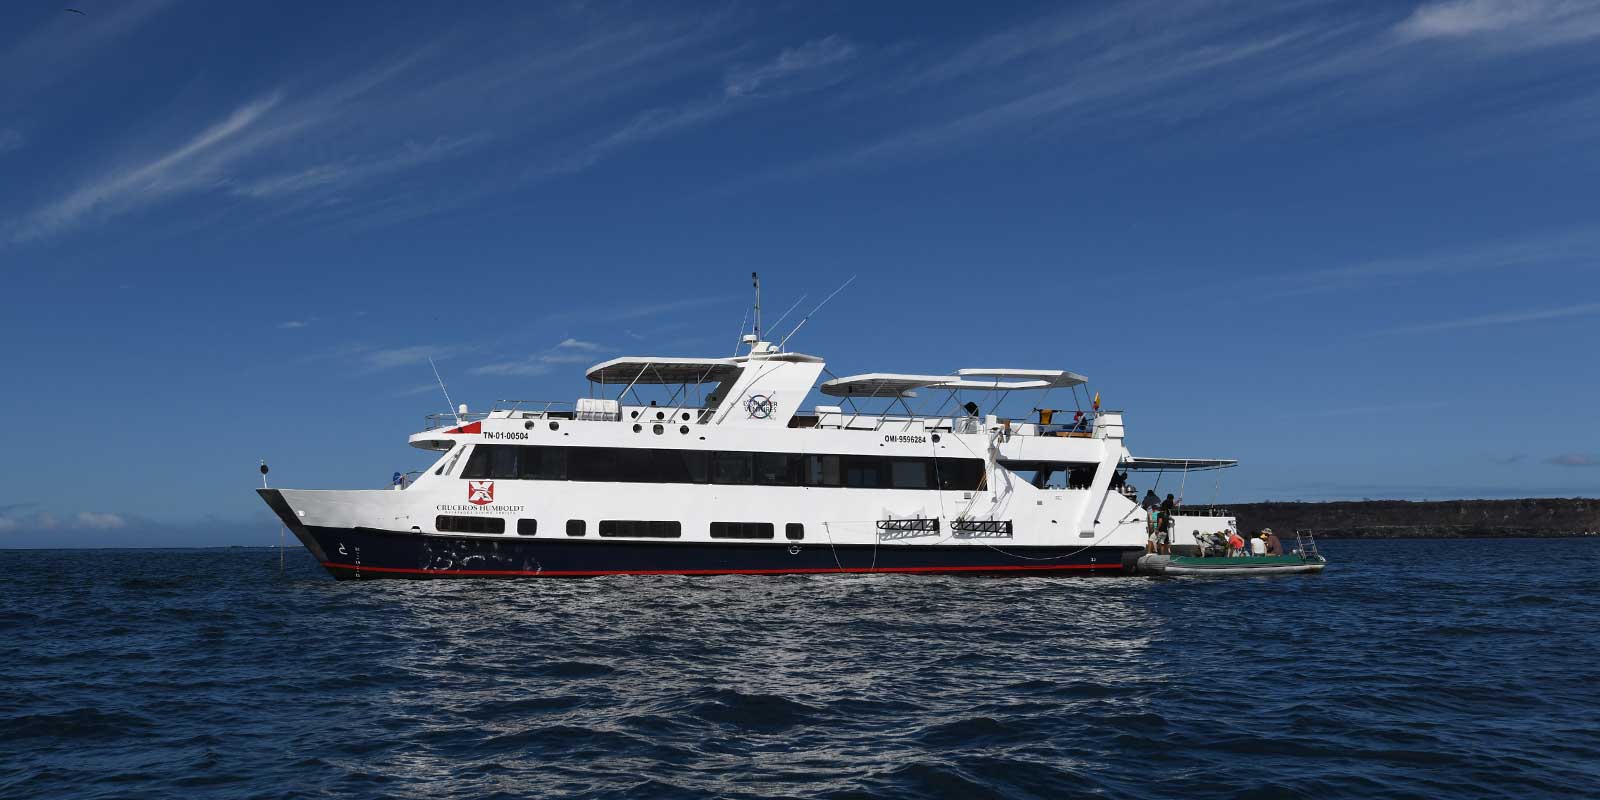 Humboldt Explorer in the Galapagos Islands